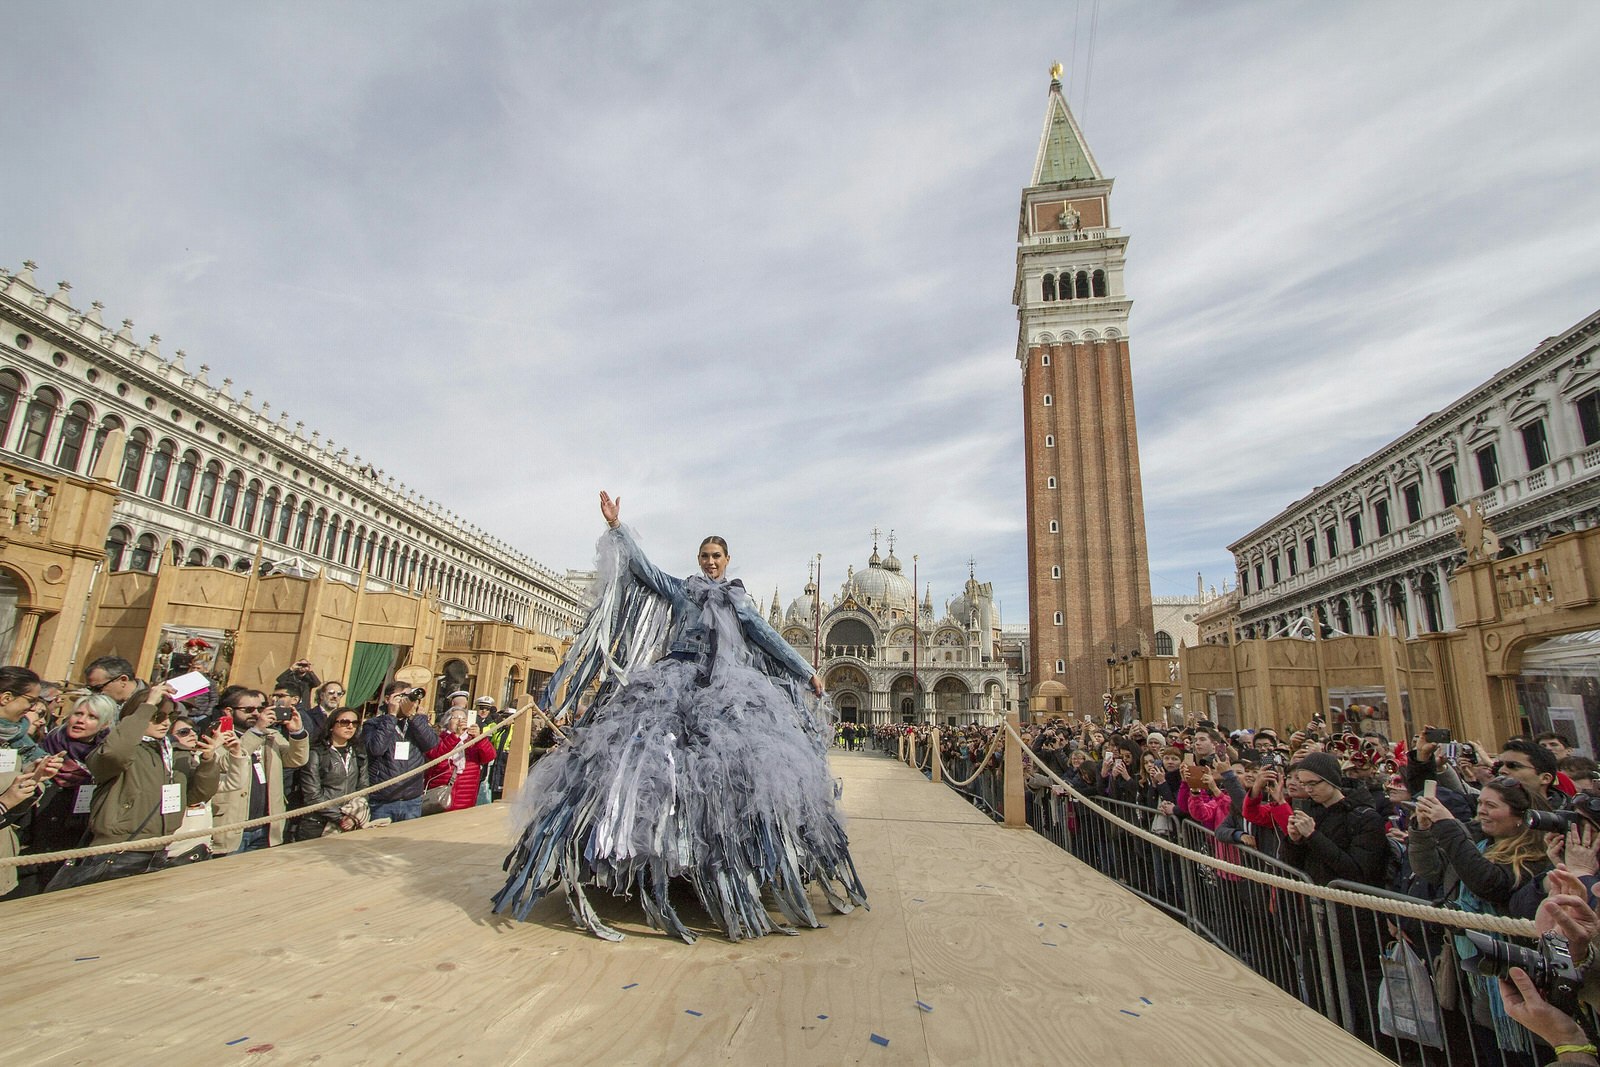 Huge crowds flock to watch the Flight of the Angel in Piazzo San Marco.